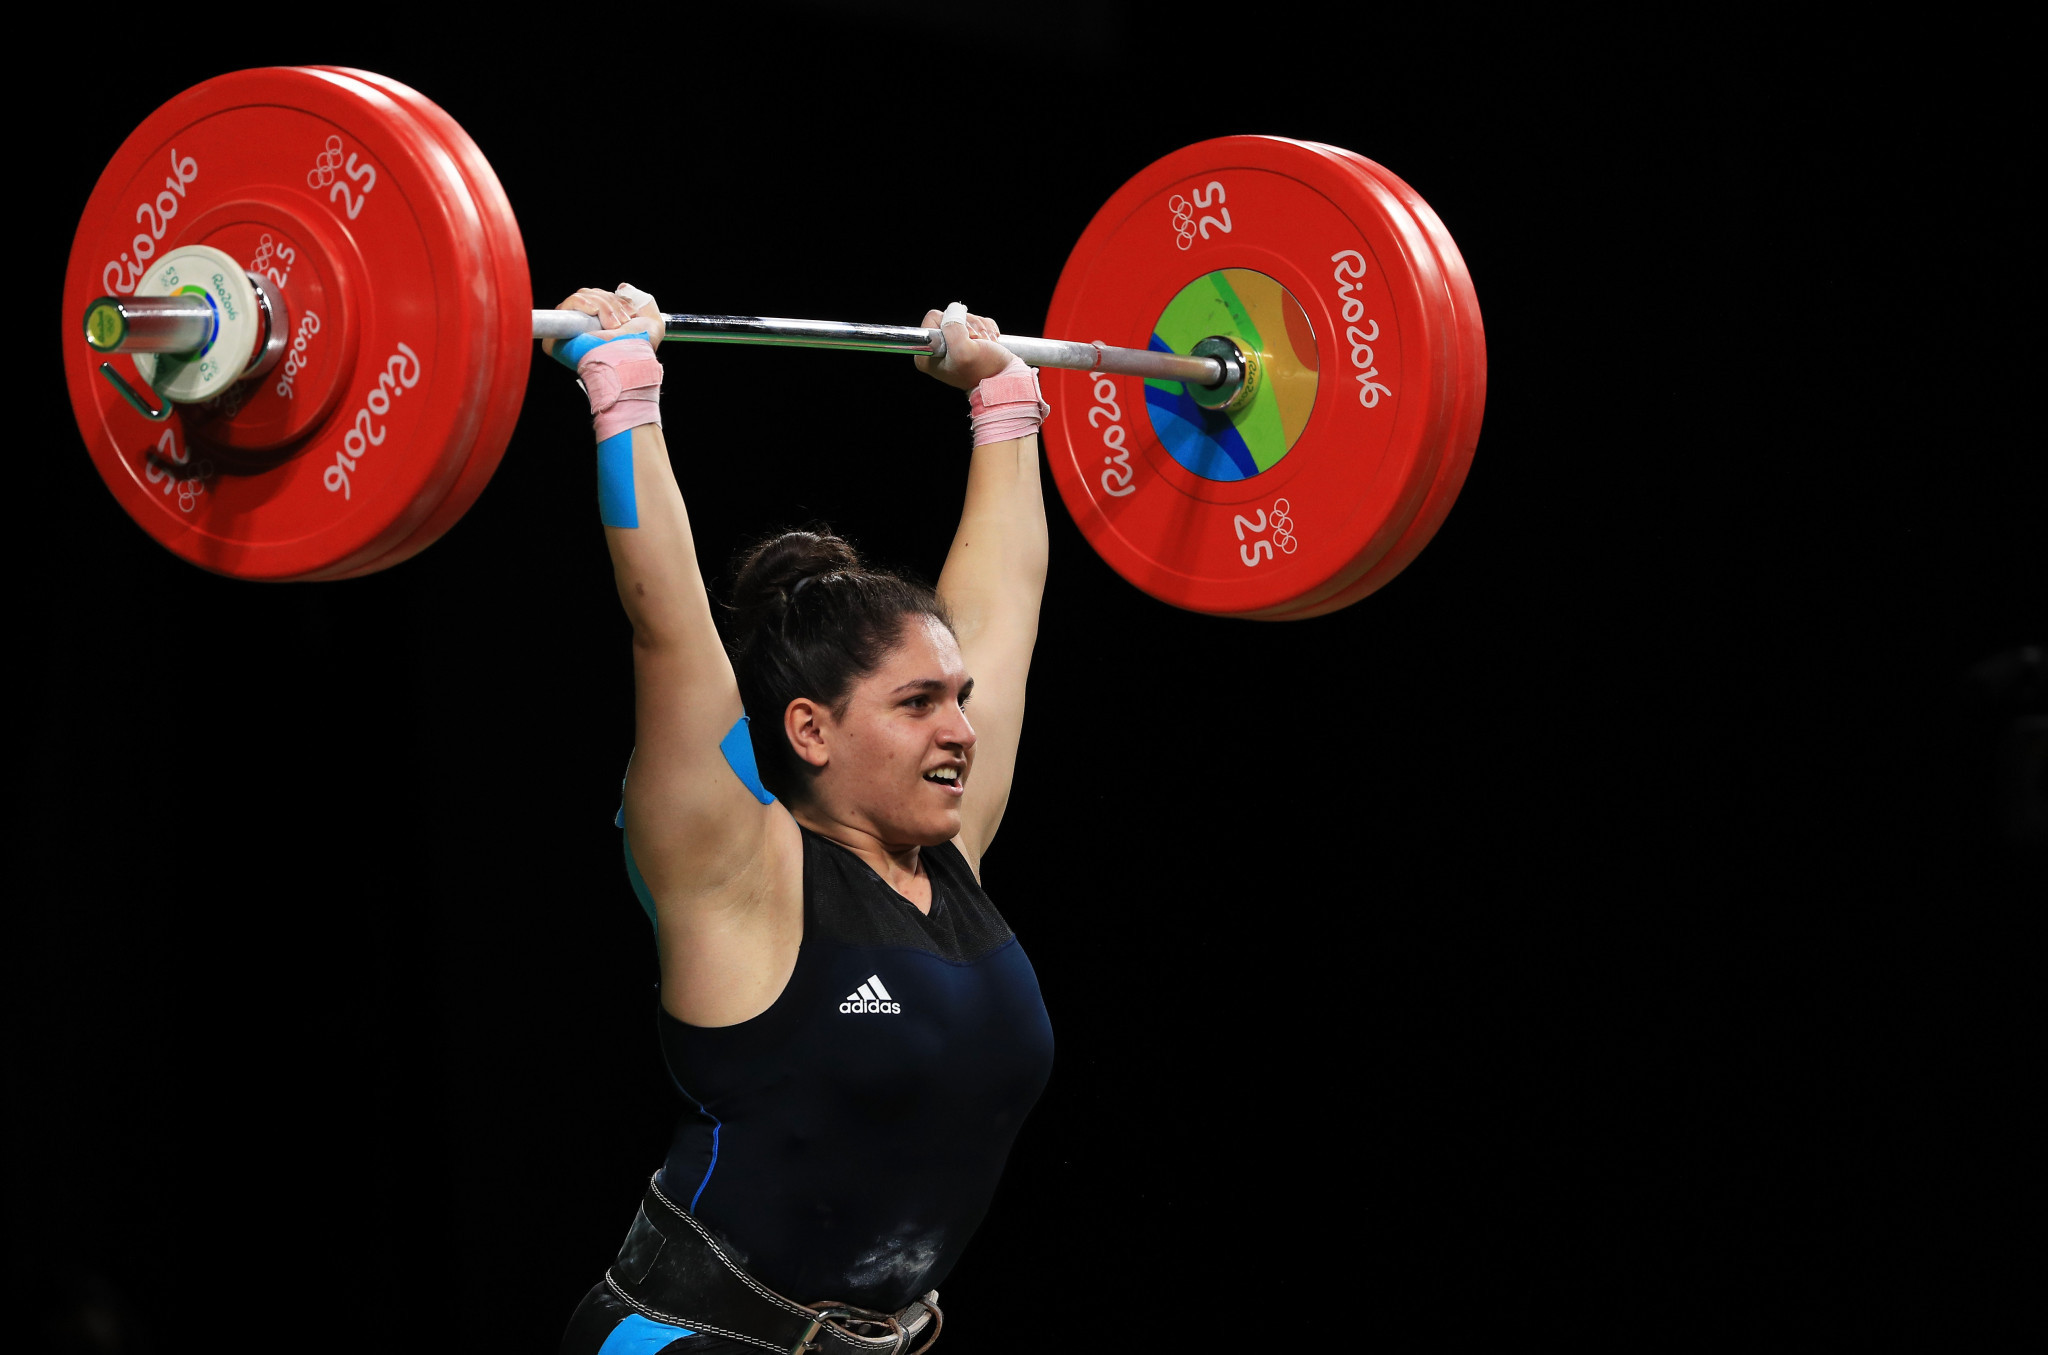 The IWF has also announced a failure against Sona Poghosyan ©Getty Images